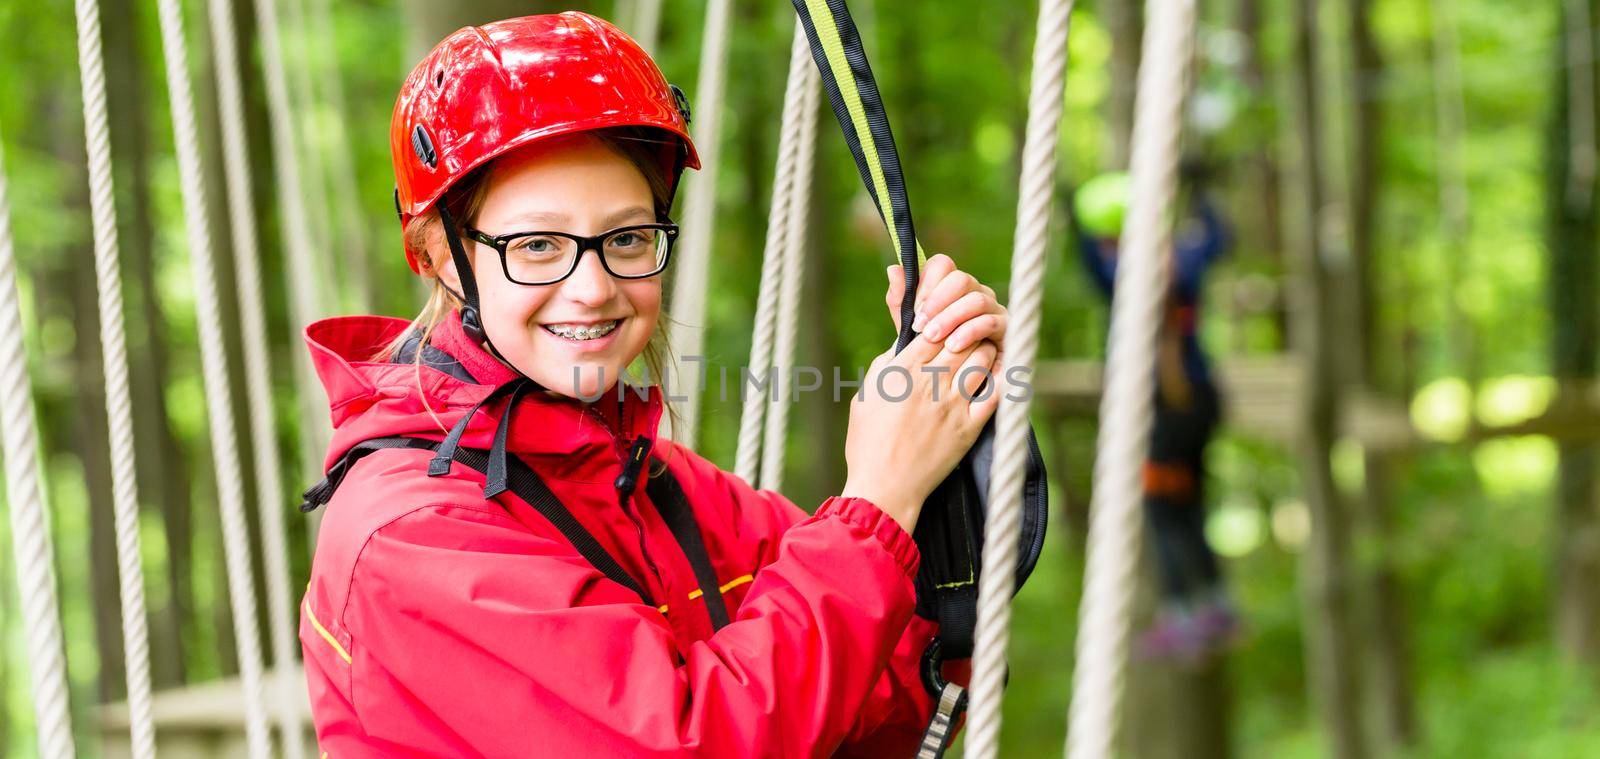 Girl roping up in high rope course by Kzenon